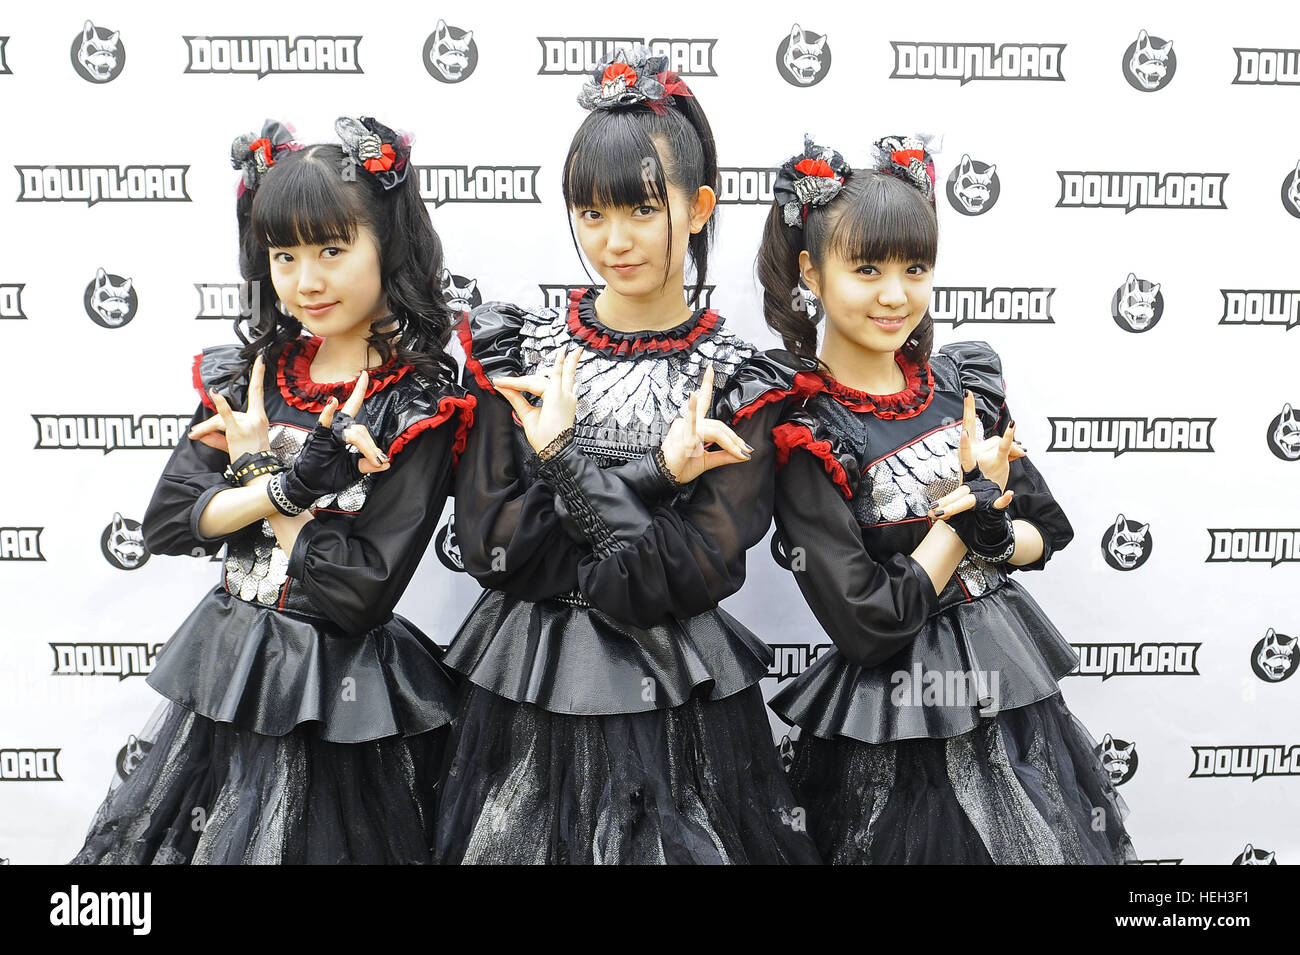 Babymetal Attending A Photocall At The 2016 Download Festival Held At